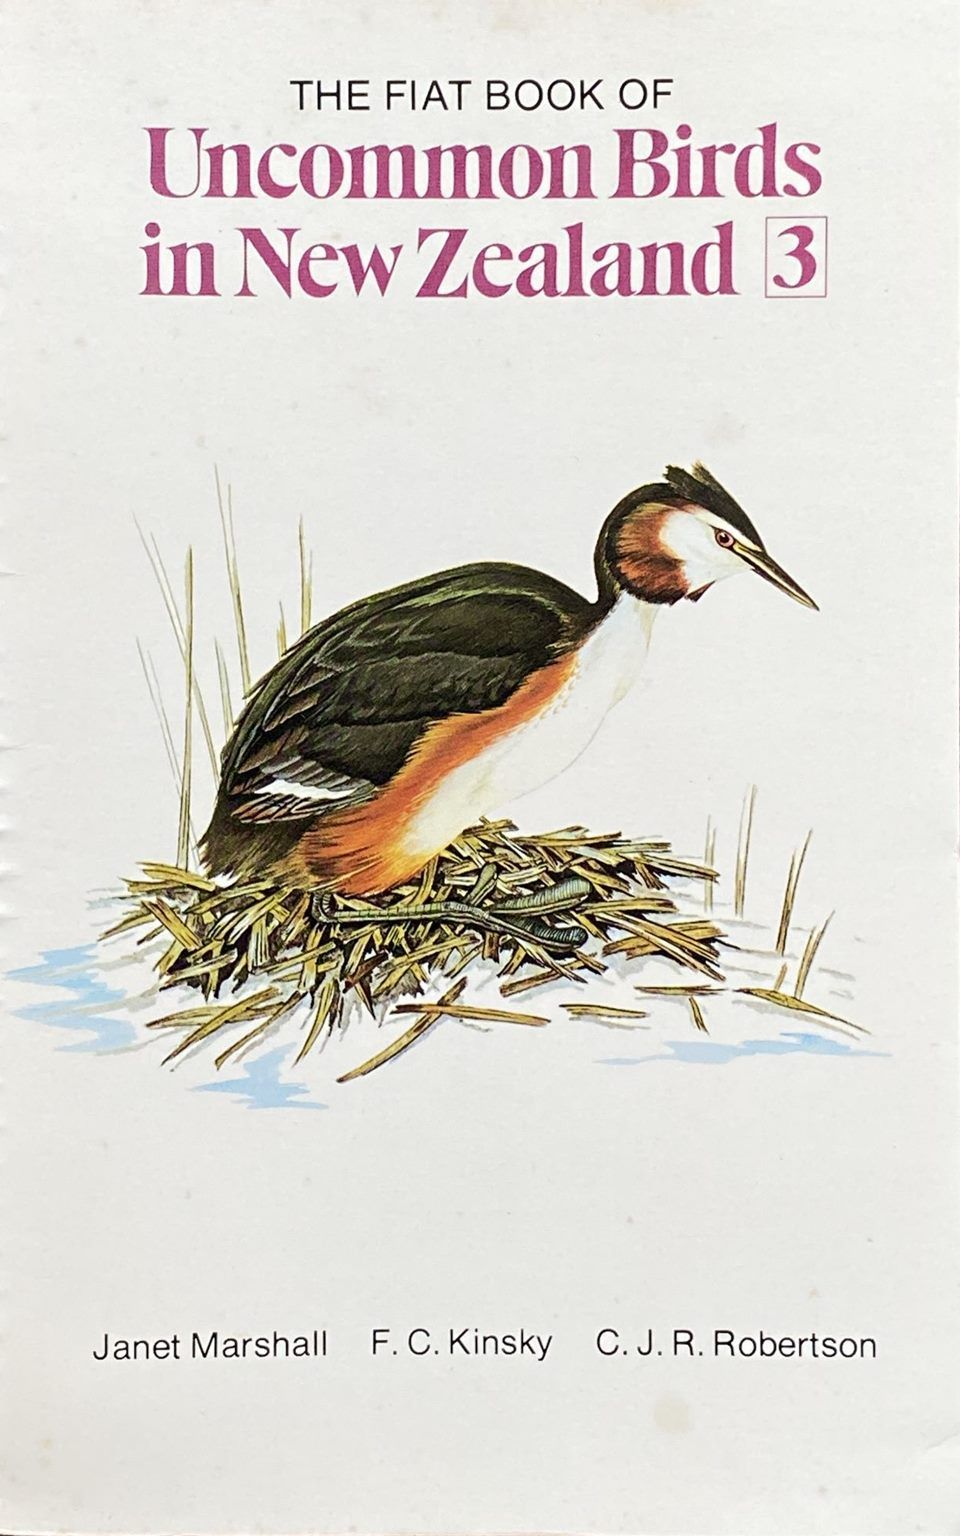 THE FIAT BOOK OF Uncommon Birds of New Zealand 3